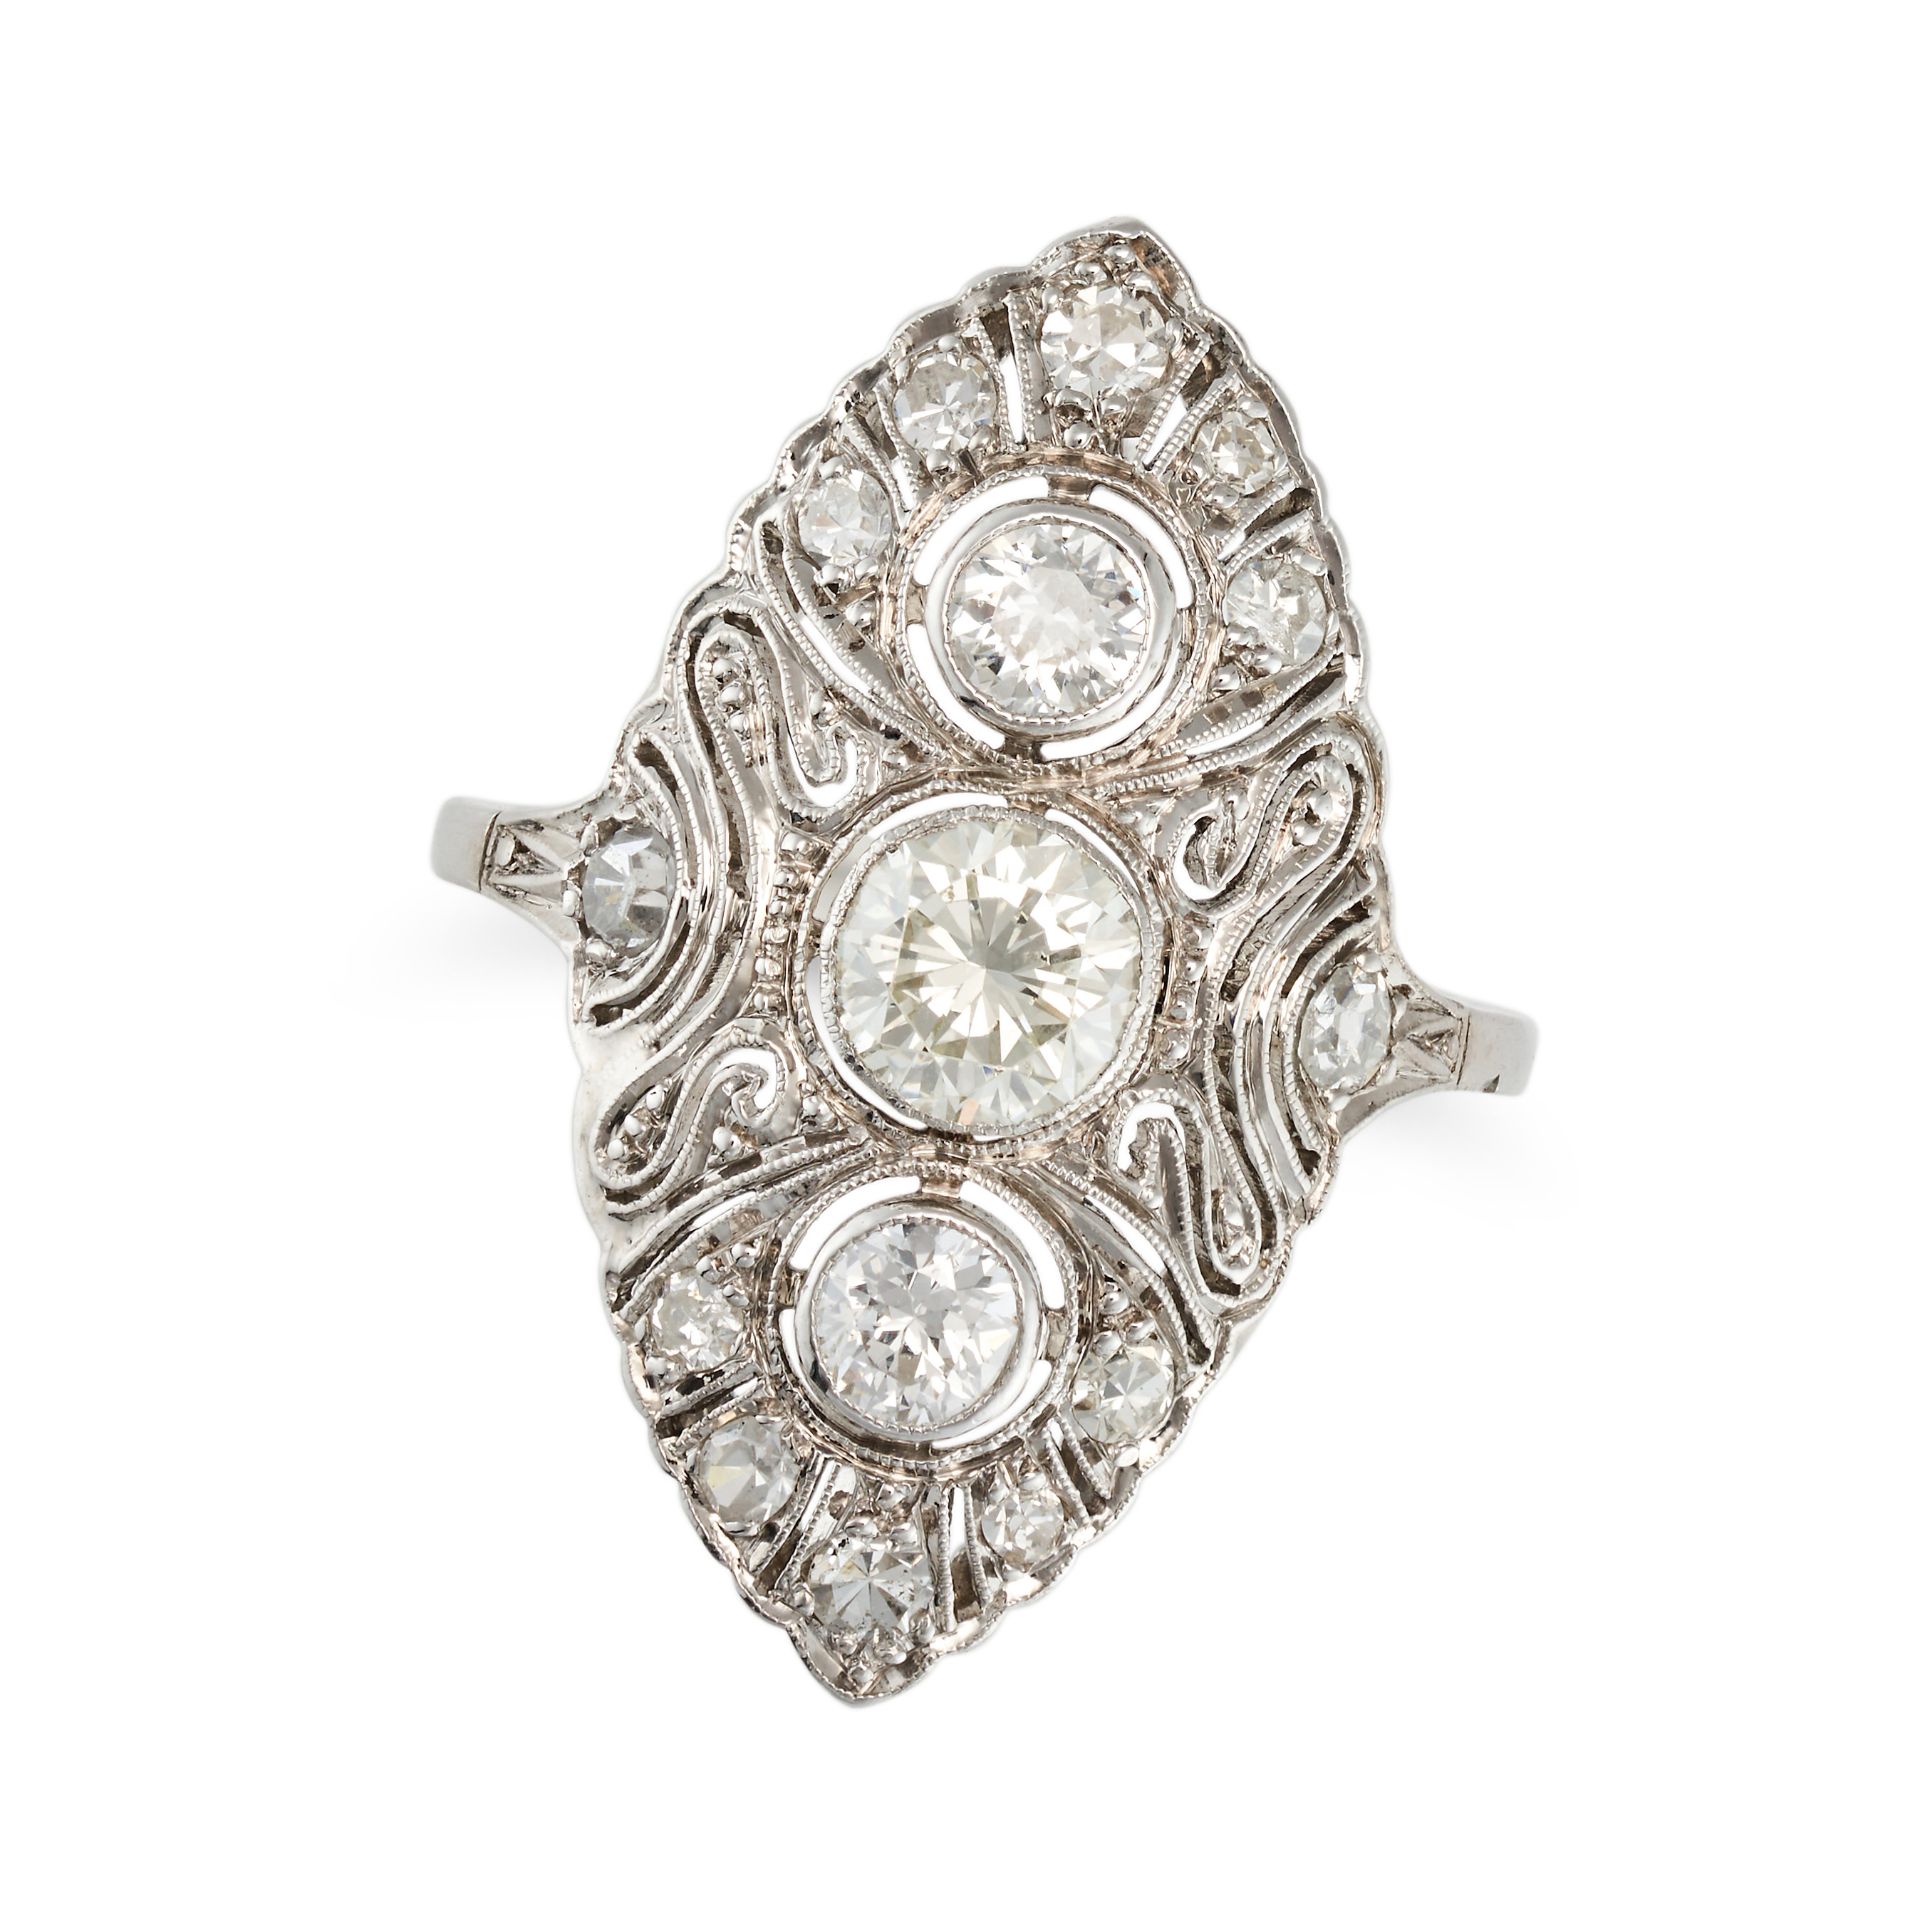 A DIAMOND NAVETTE RING in white gold, the pierced navette face set with three principal round cut...